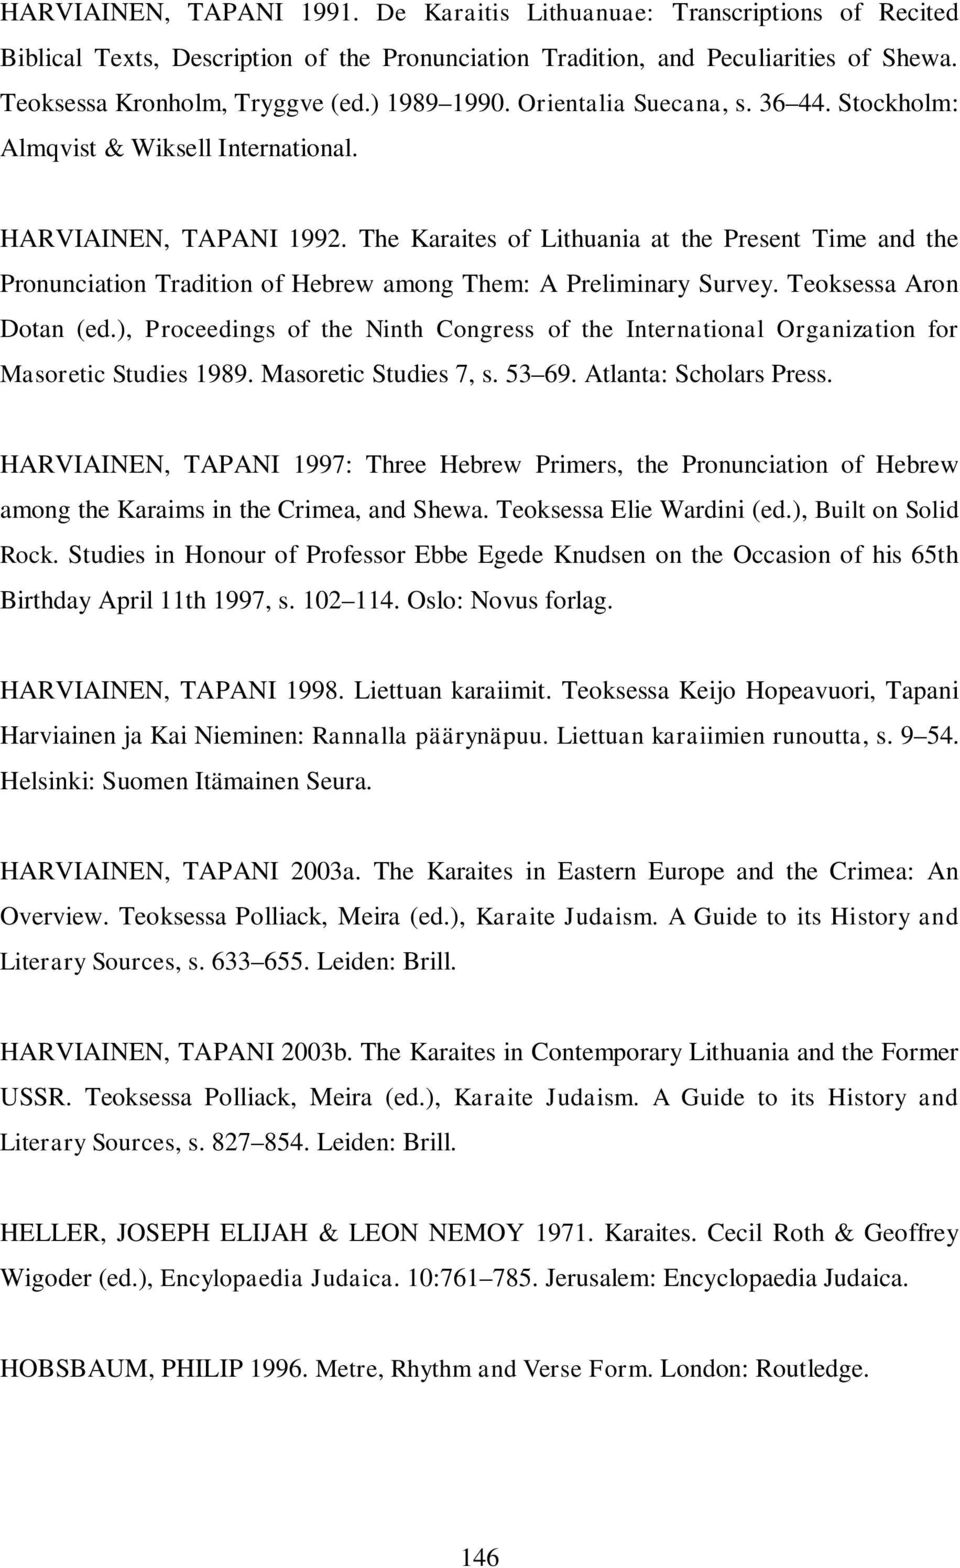 The Karaites of Lithuania at the Present Time and the Pronunciation Tradition of Hebrew among Them: A Preliminary Survey. Teoksessa Aron Dotan (ed.